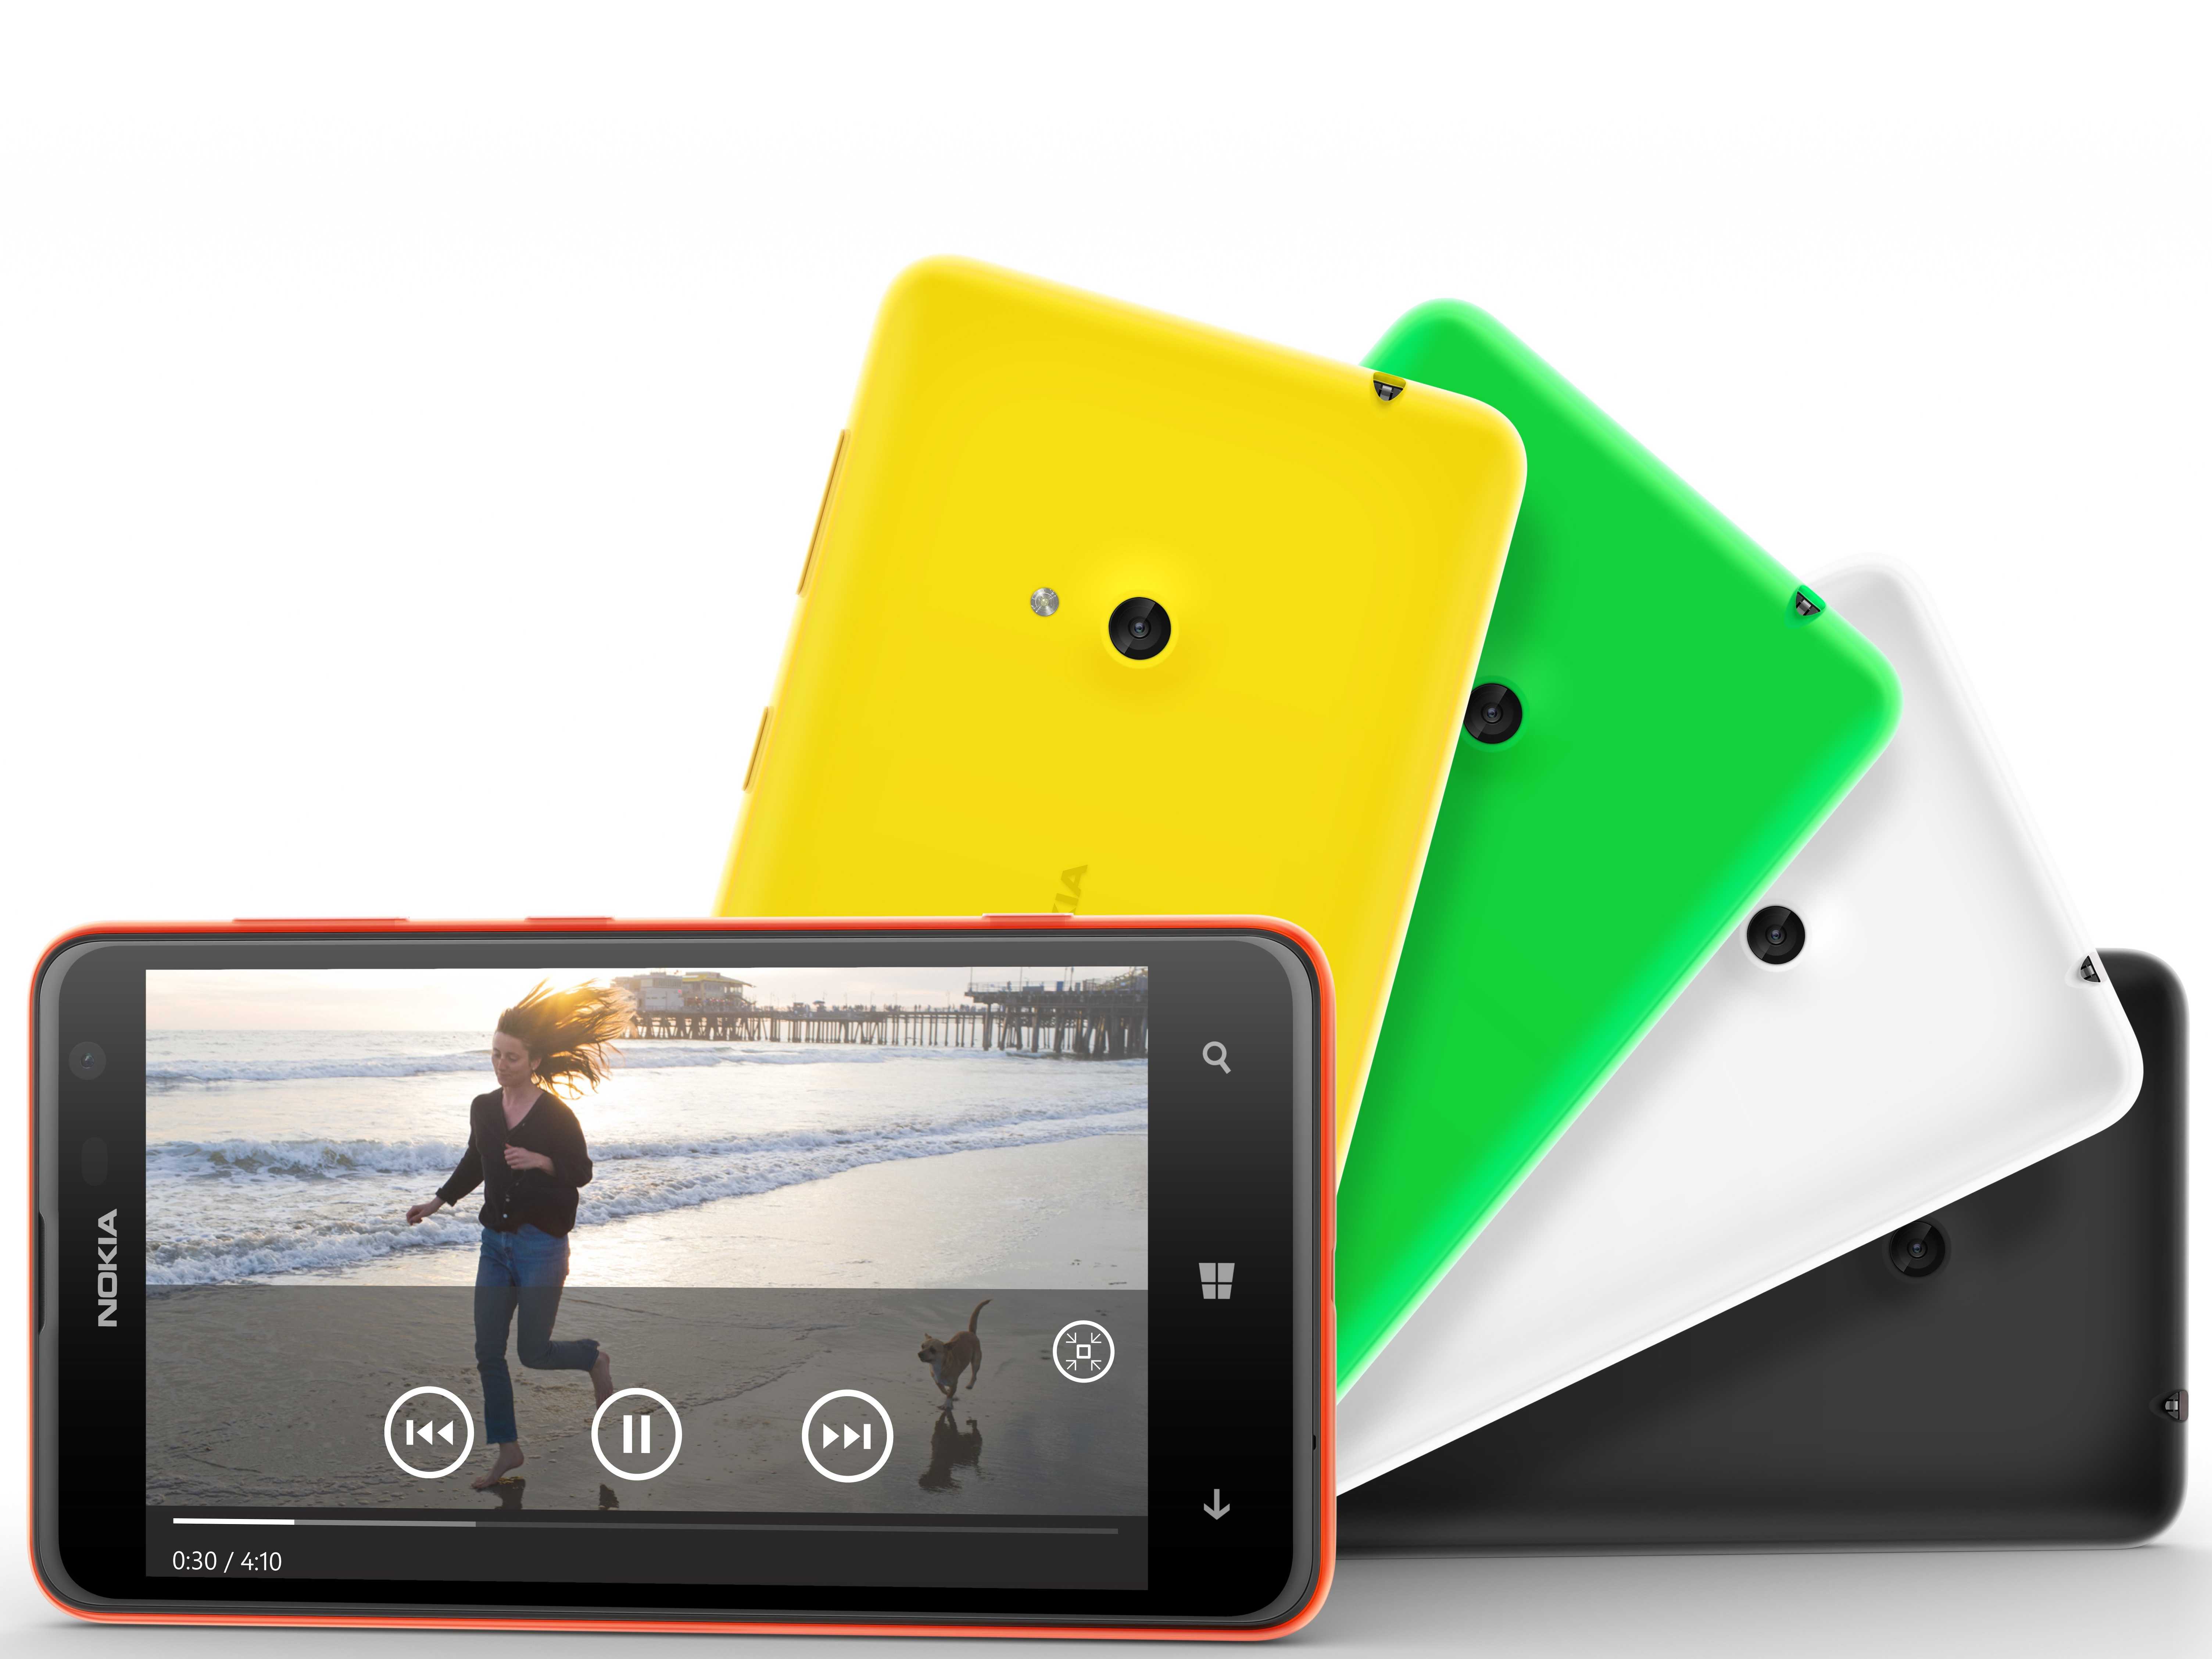 pictures-nokia-debuted-its-new-big-screen-lumia-625-today1377509432.jpg